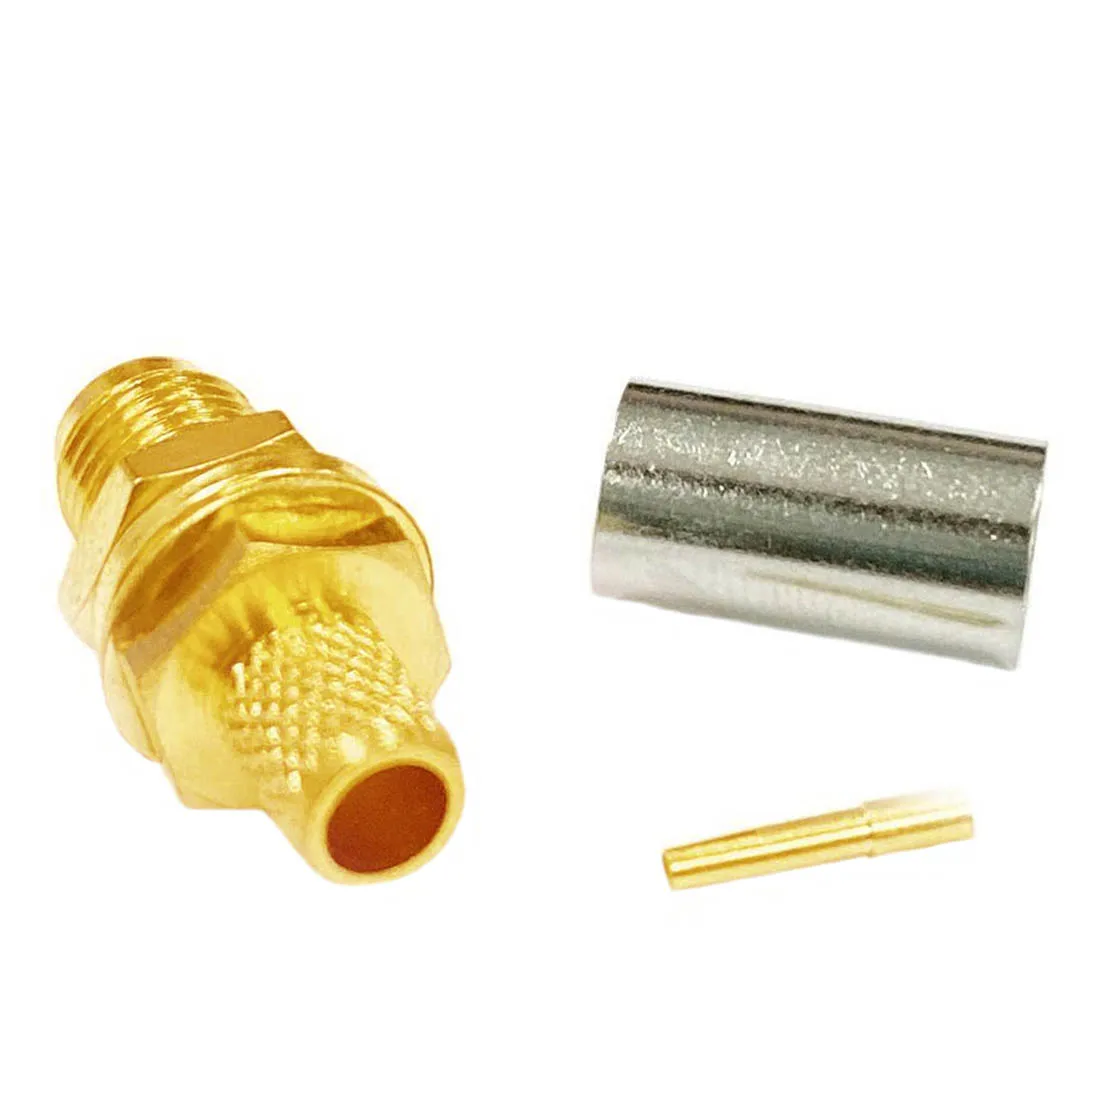 1pc SMA Connector Female Jack Nut RF Coax Modem Convertor Crimp for RG58 RG142 RG400 LMR195 Cable  Straight  Goldplated  New